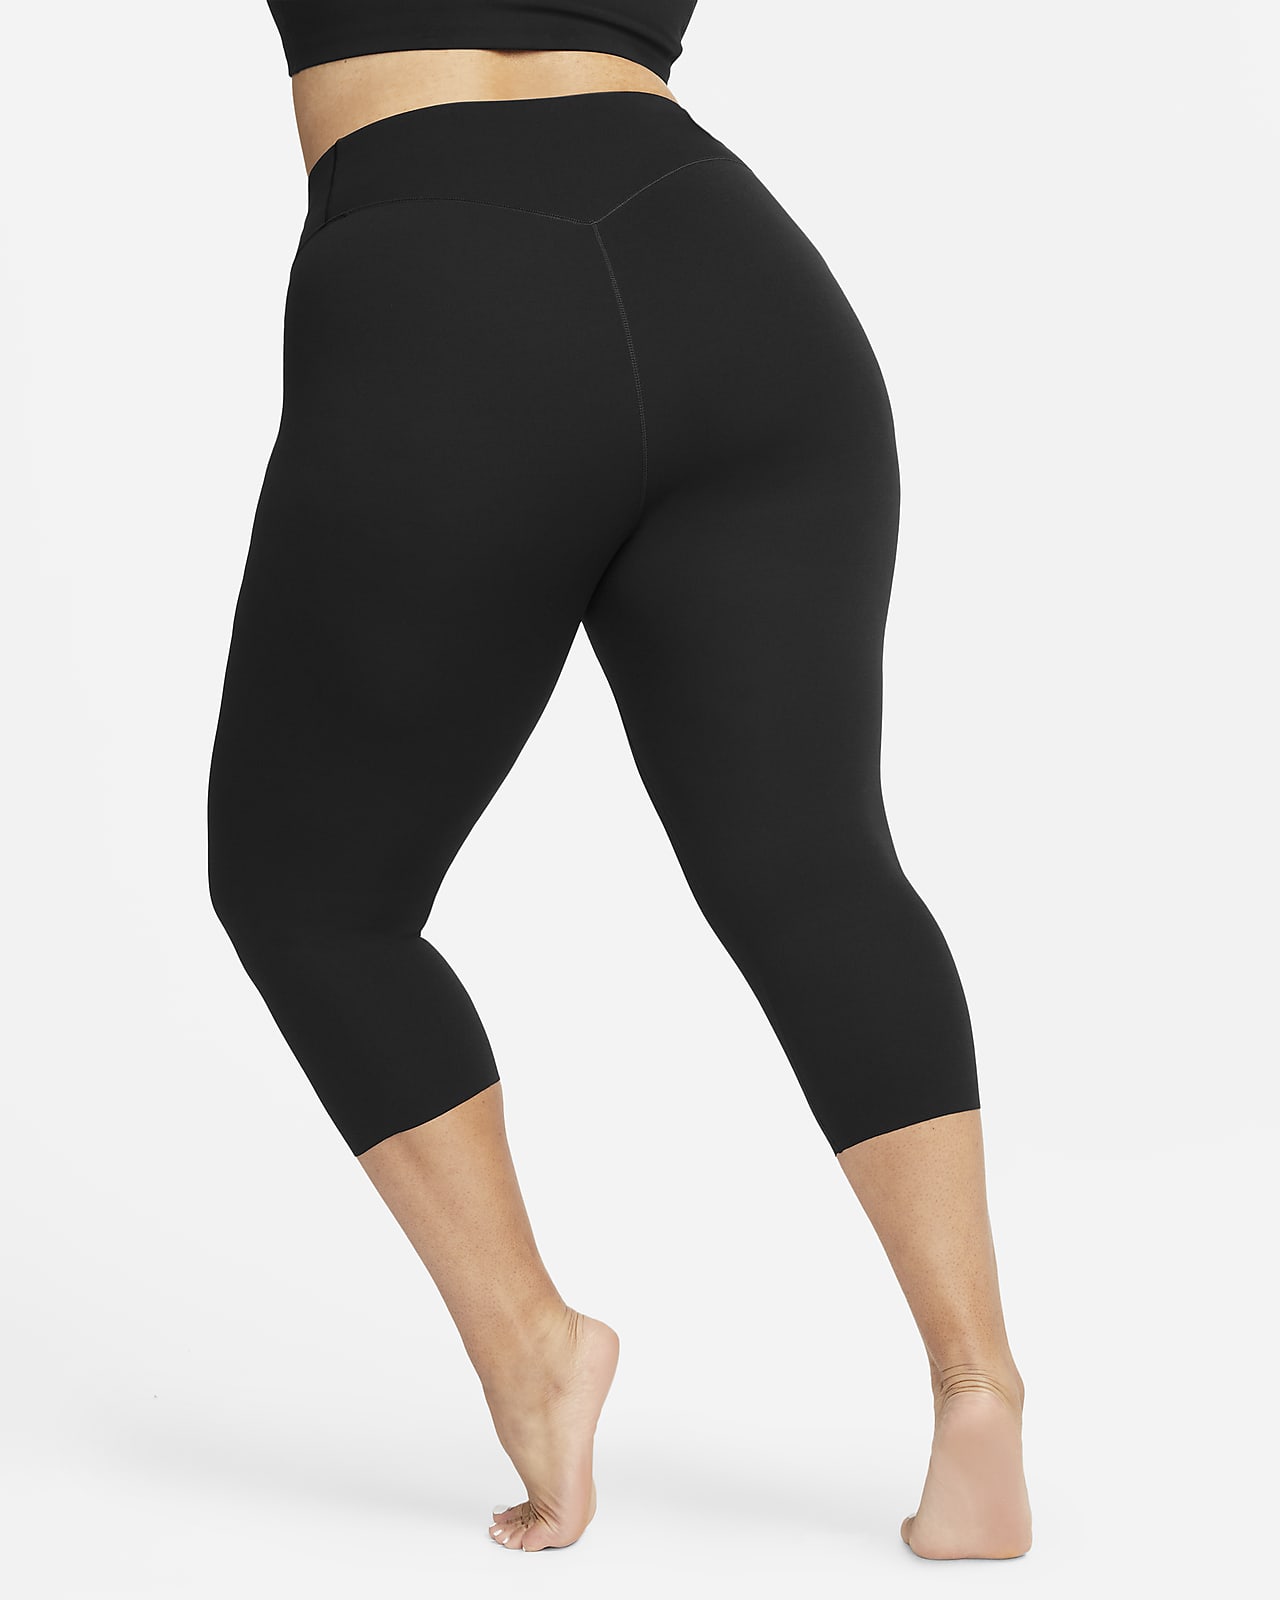 Nike Zenvy Women's Gentle-Support High-Waisted Cropped Leggings (Plus Size).